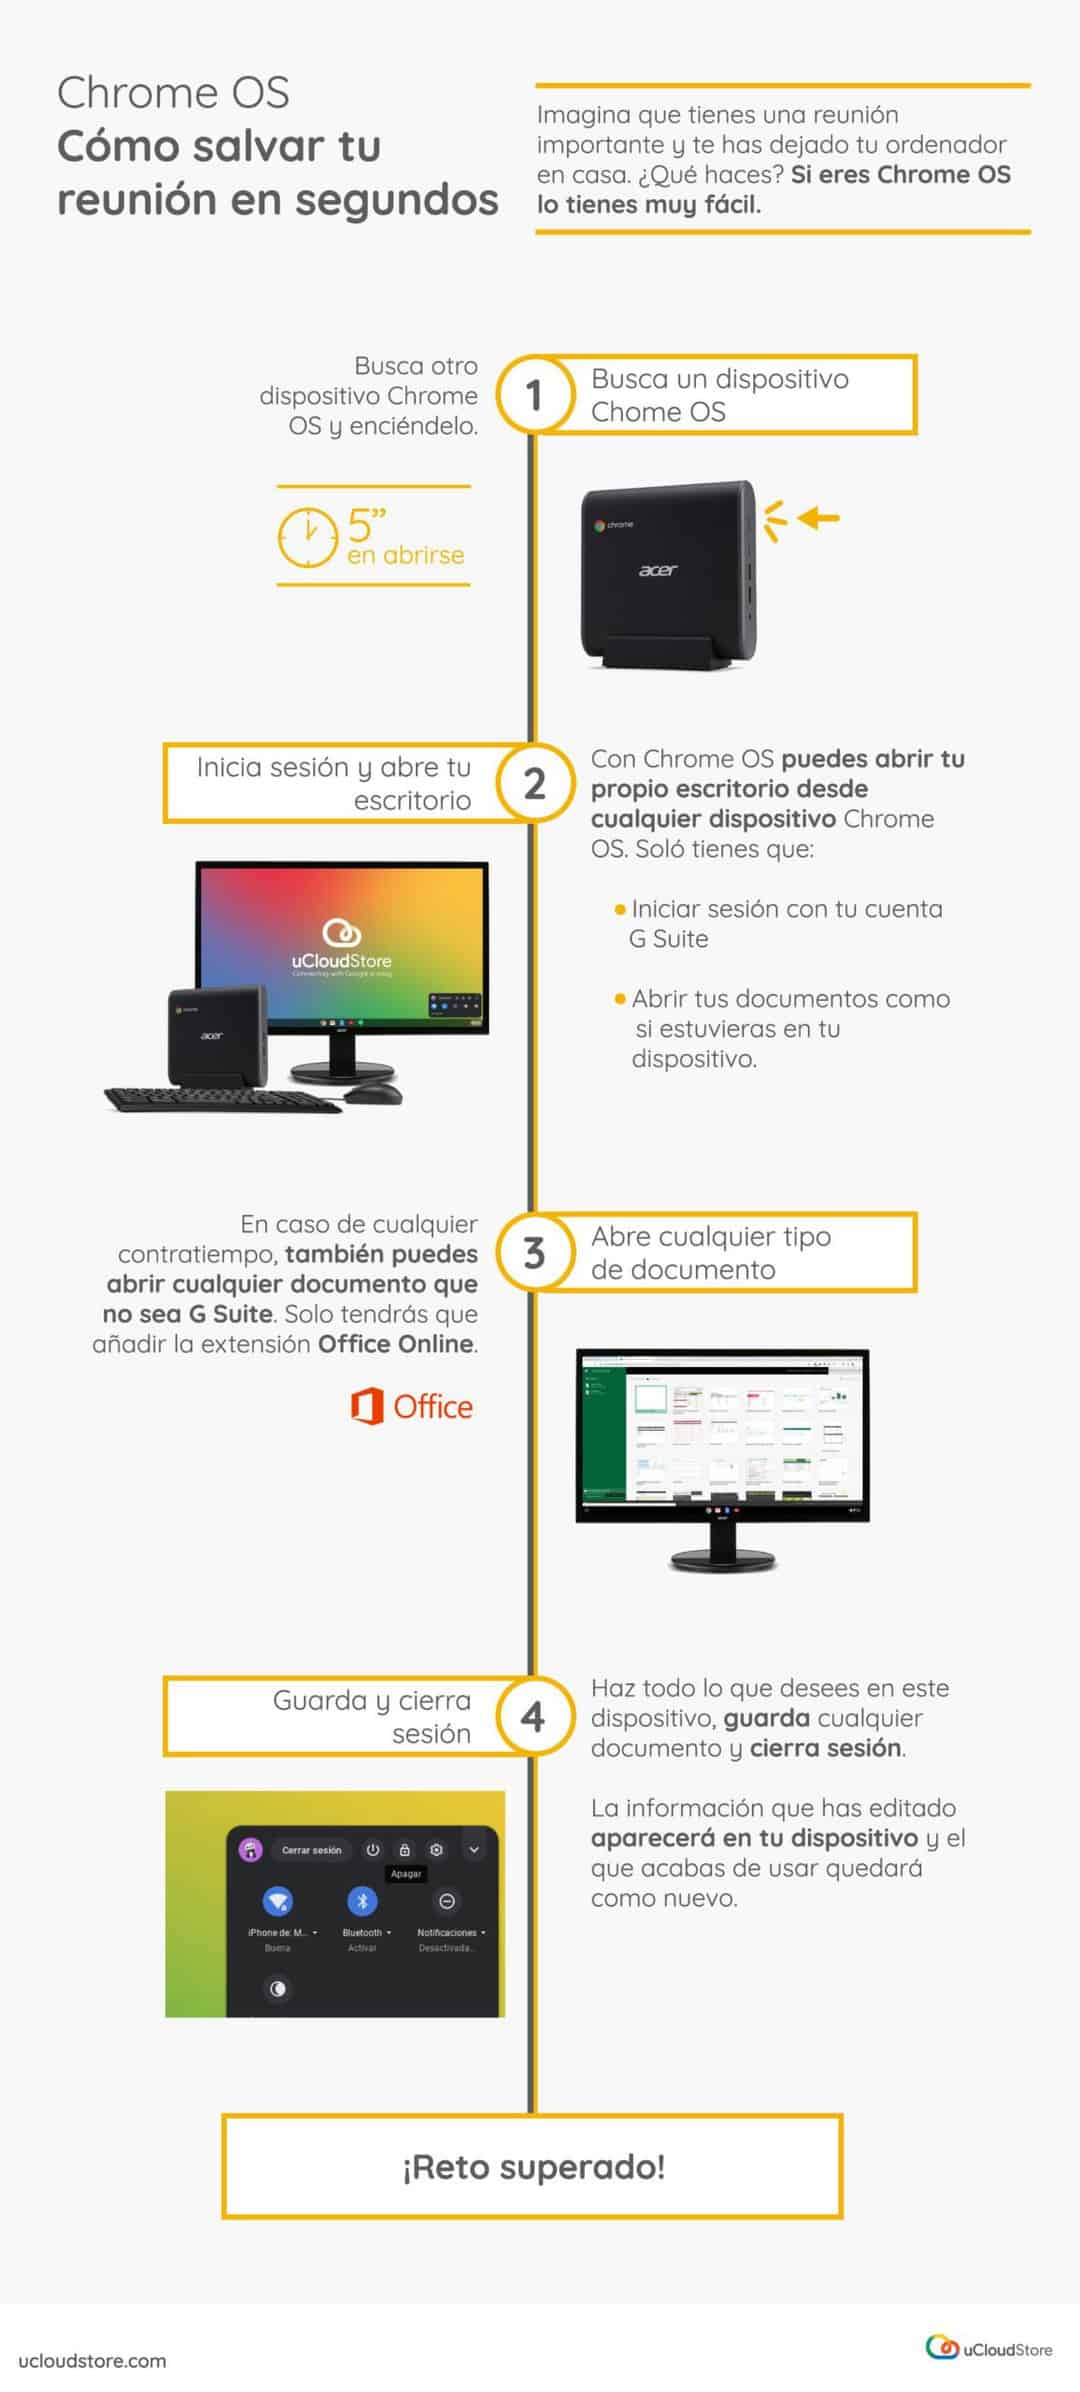 Image with Chrome OS Infographic